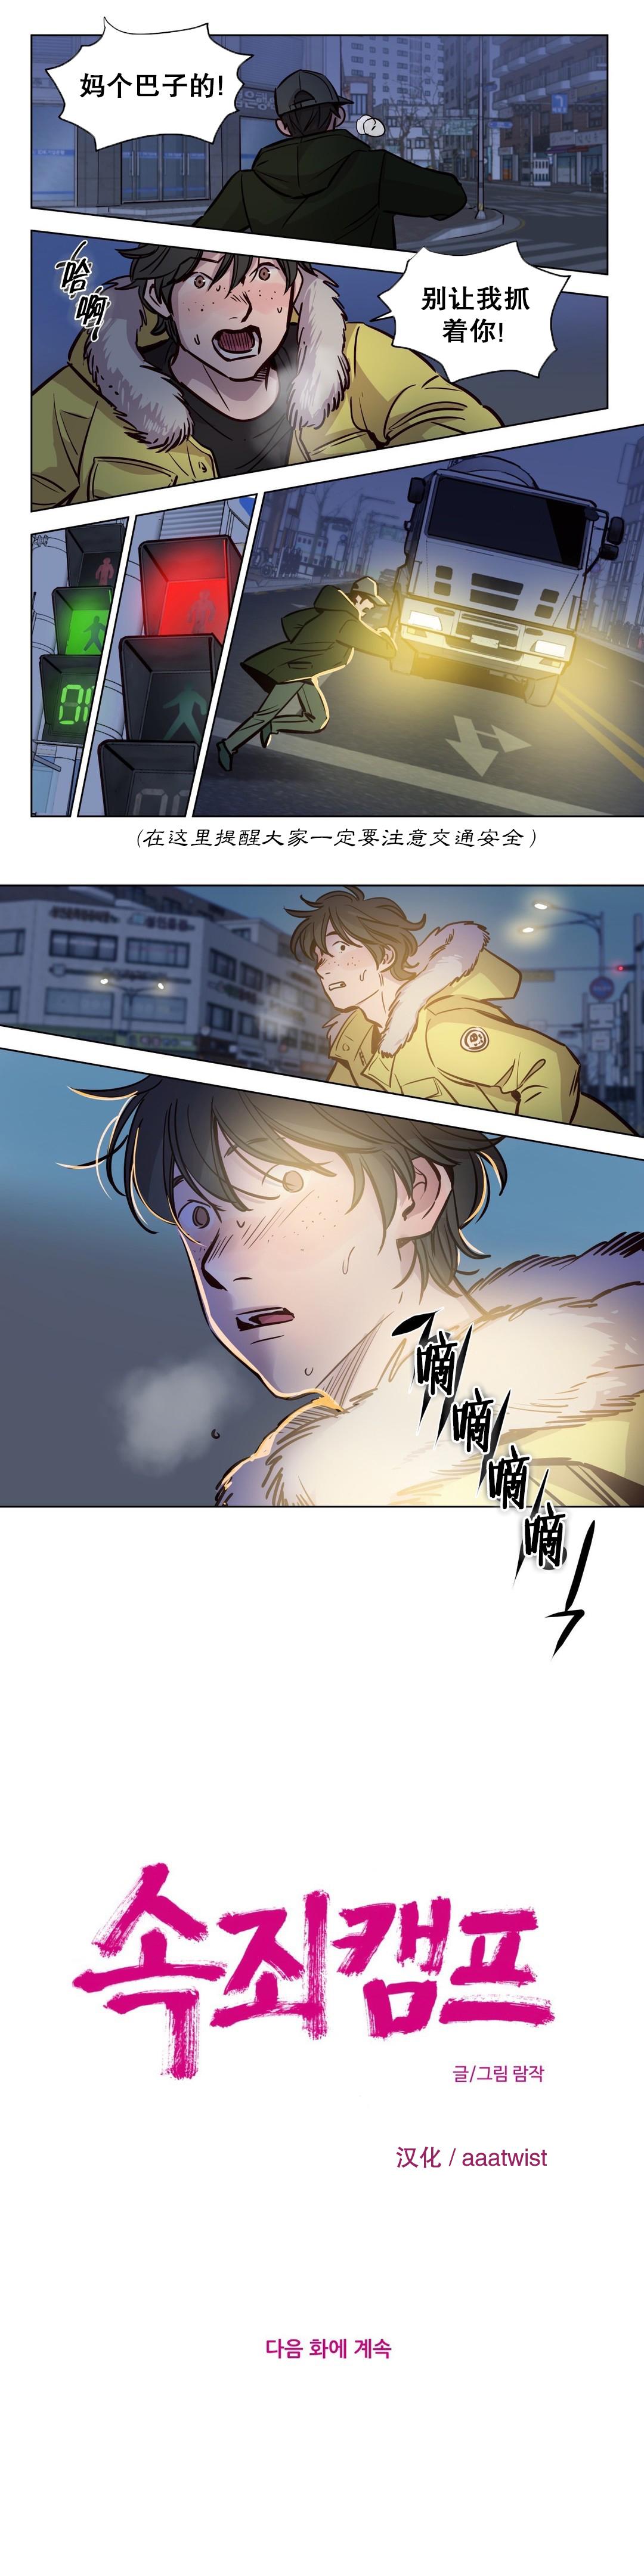 [Ramjak] 赎罪营(Atonement Camp) Ch.50-52 (Chinese) 32